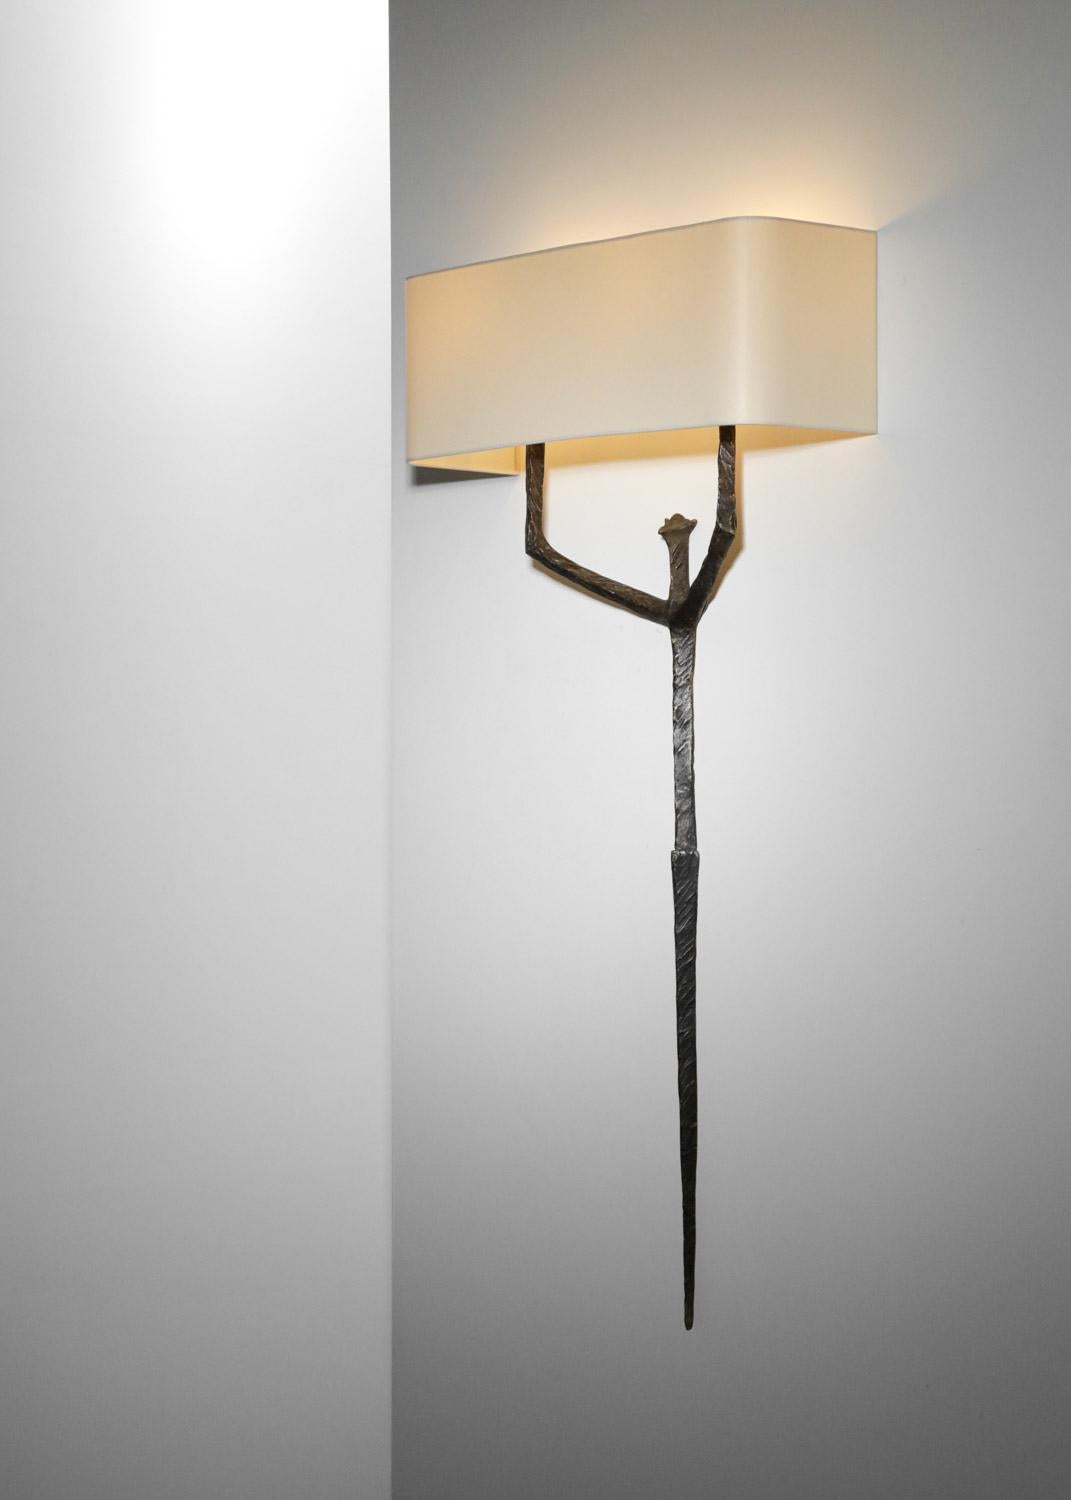 Hand-Crafted Very large wall lamp by Felix Agostini art deco in bronze Giacometti  - G686 For Sale